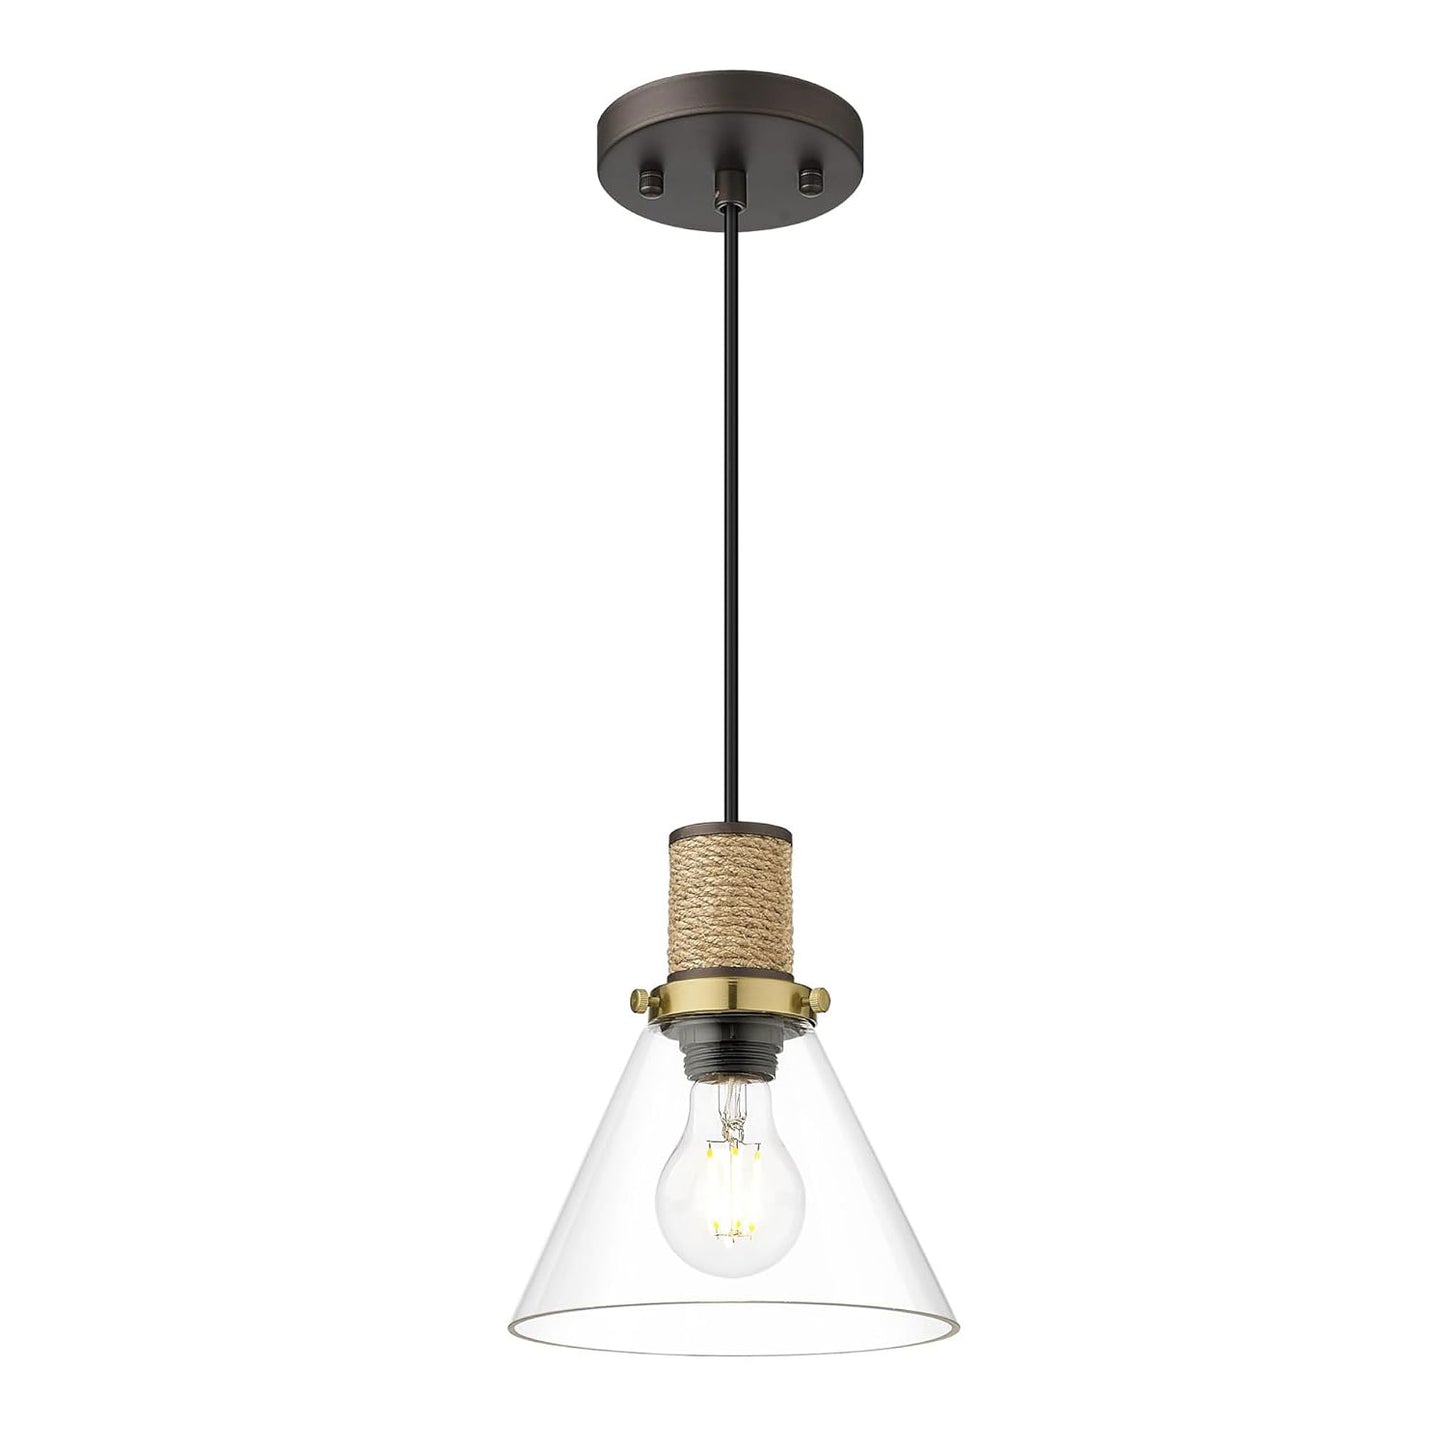 
                  
                    HWH Glass Pendant Lights Kitchen Island, 1-Light Hanging Light Fixtures 8'' Farmhouse Pendant Lighting Over Island, Flared Glass Shade, Oil-Rubbed Bronze and Brass Finish, 5HZG92MIL ORB+BG
                  
                